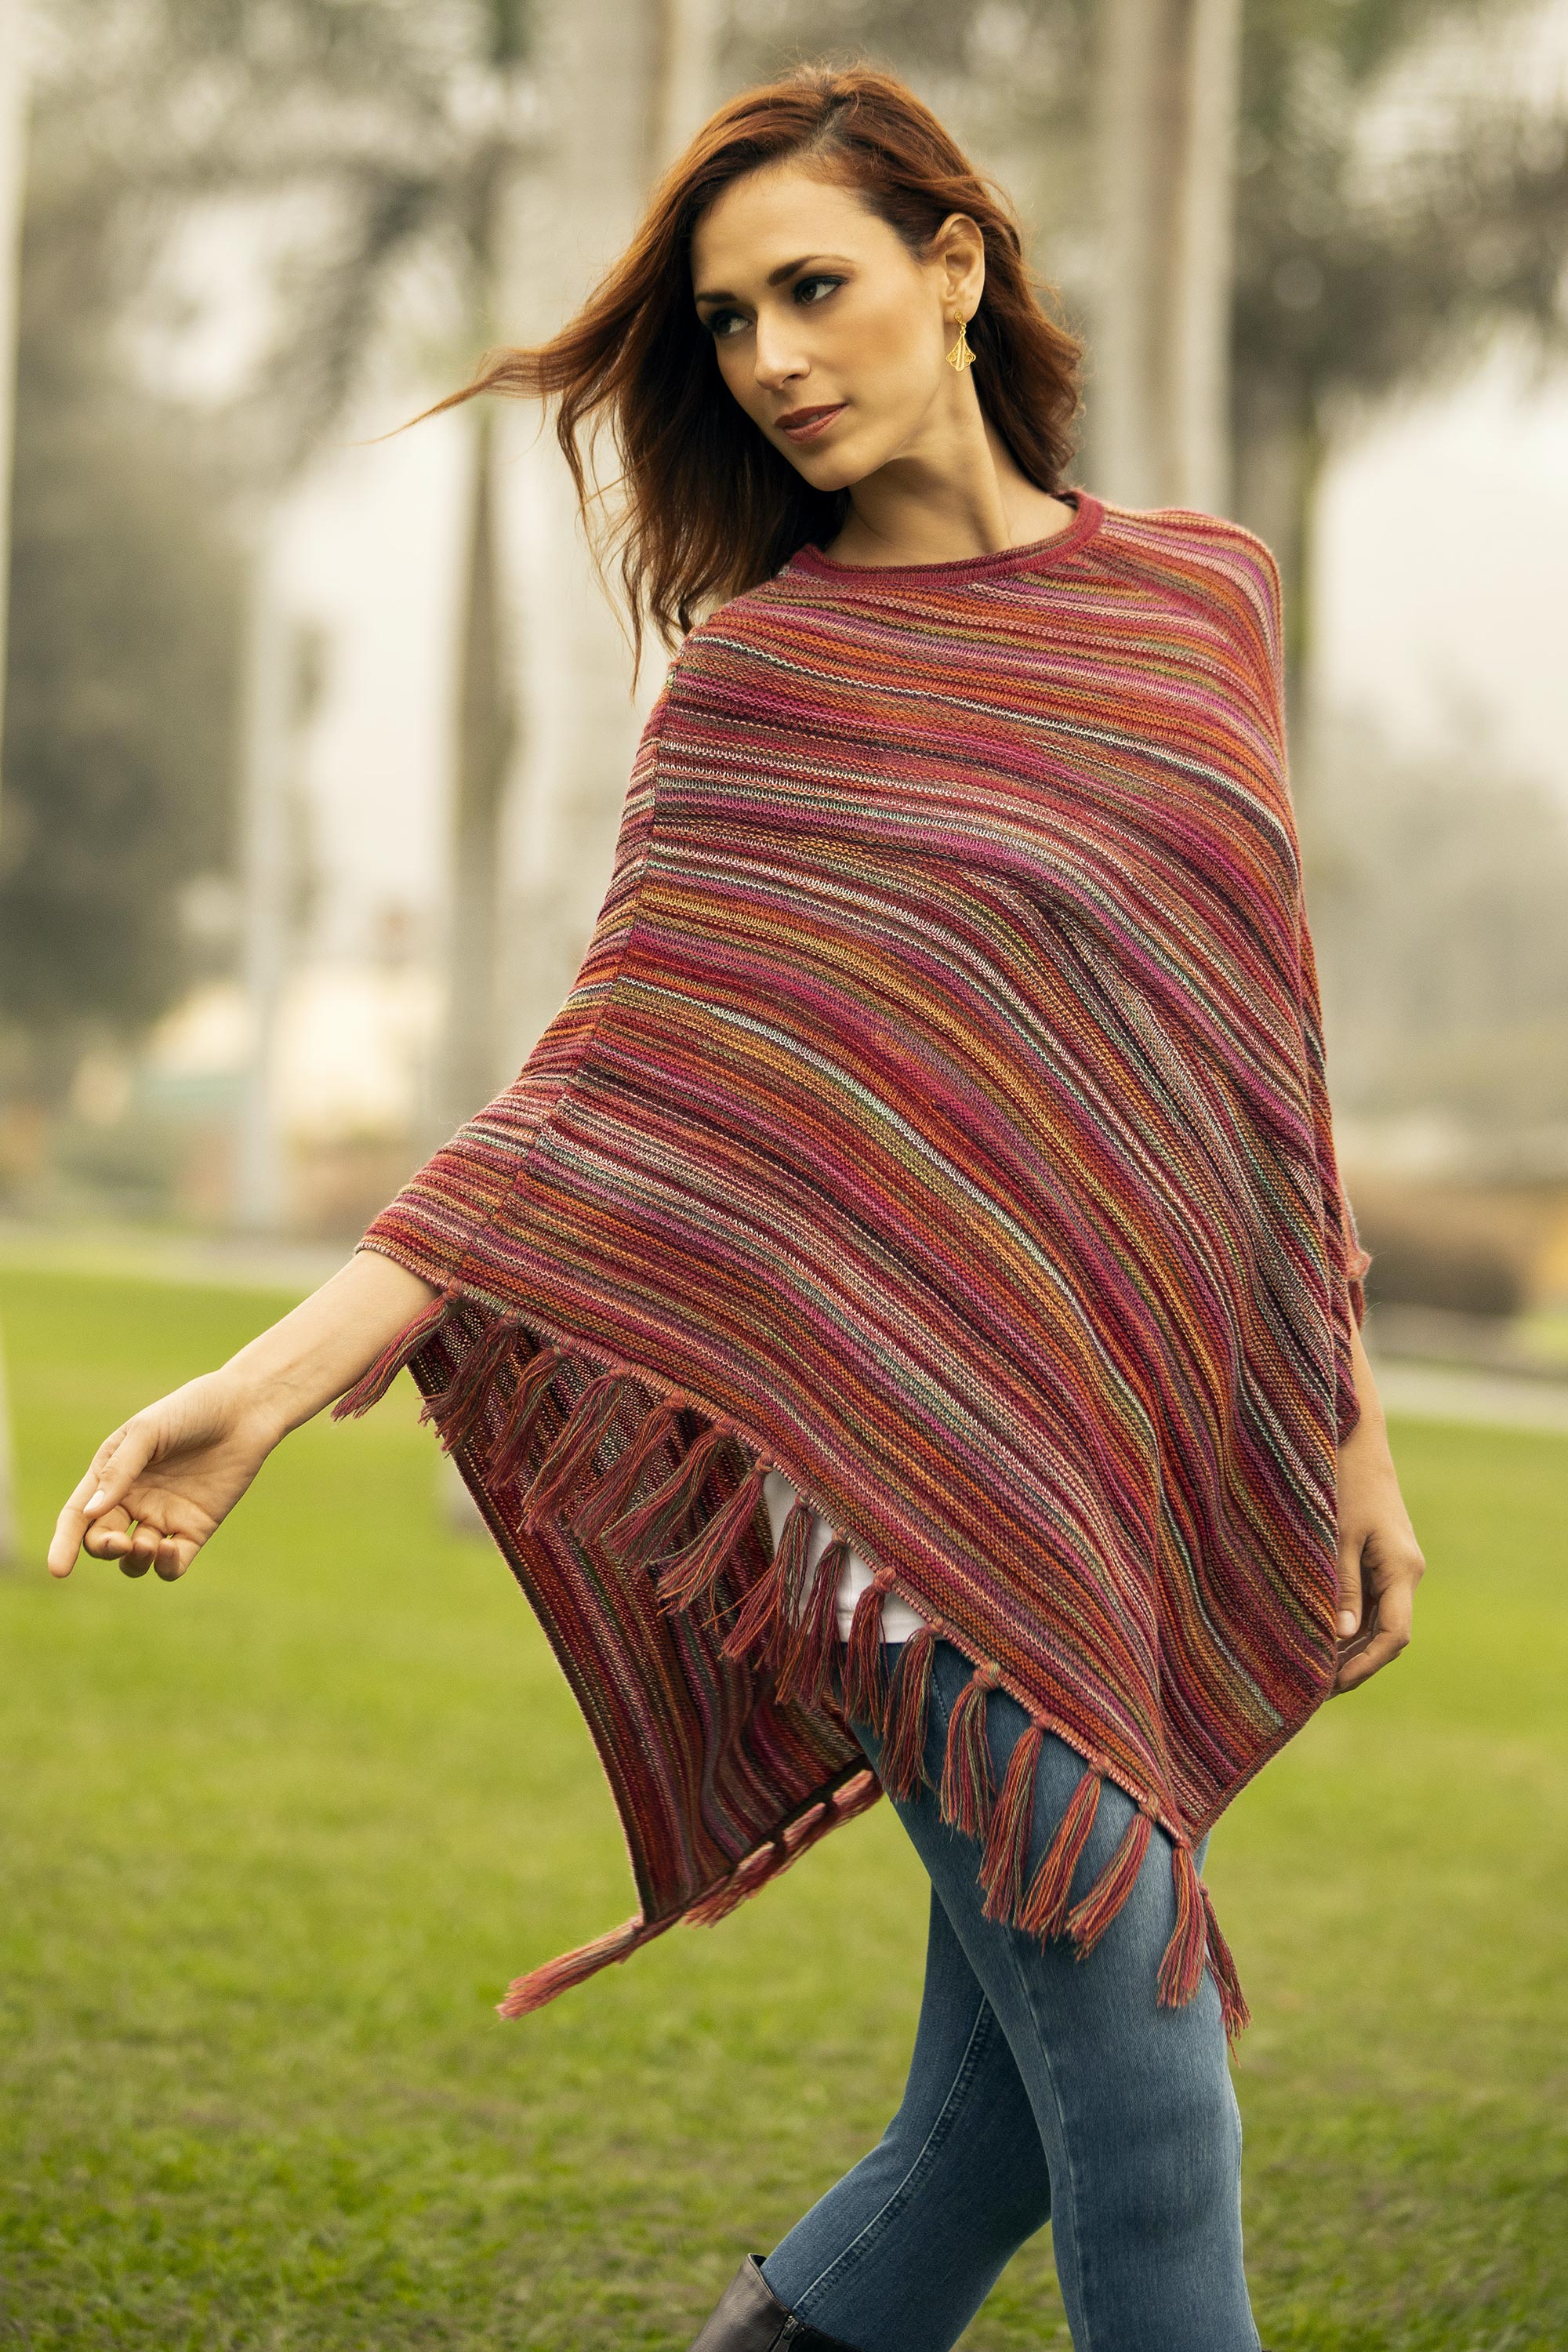 Multi-Color Striped 100% Alpaca Wool Knit Fringed Poncho, 'Swirling Fire